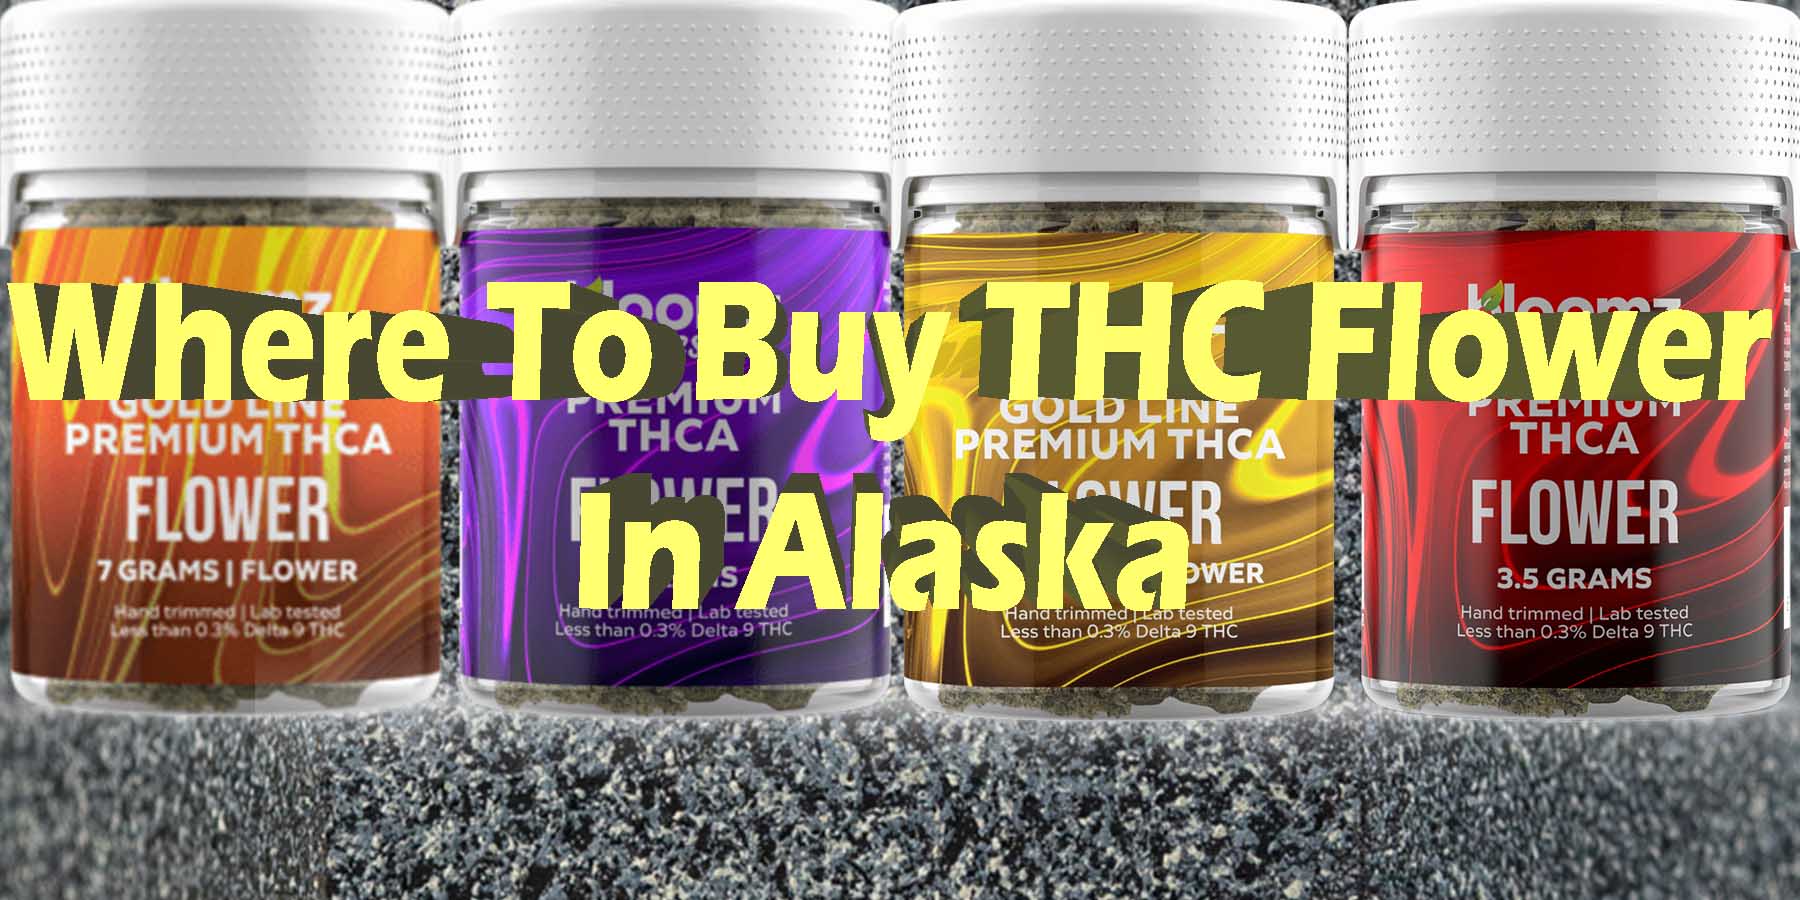 Where To Buy THC Flower In Alaska WhereToGet HowToGetNearMe BestPlace LowestPrice Coupon Discount For Smoking Best High Smoke Shop Online Near Me StrongestBrand BestBrand Binoid